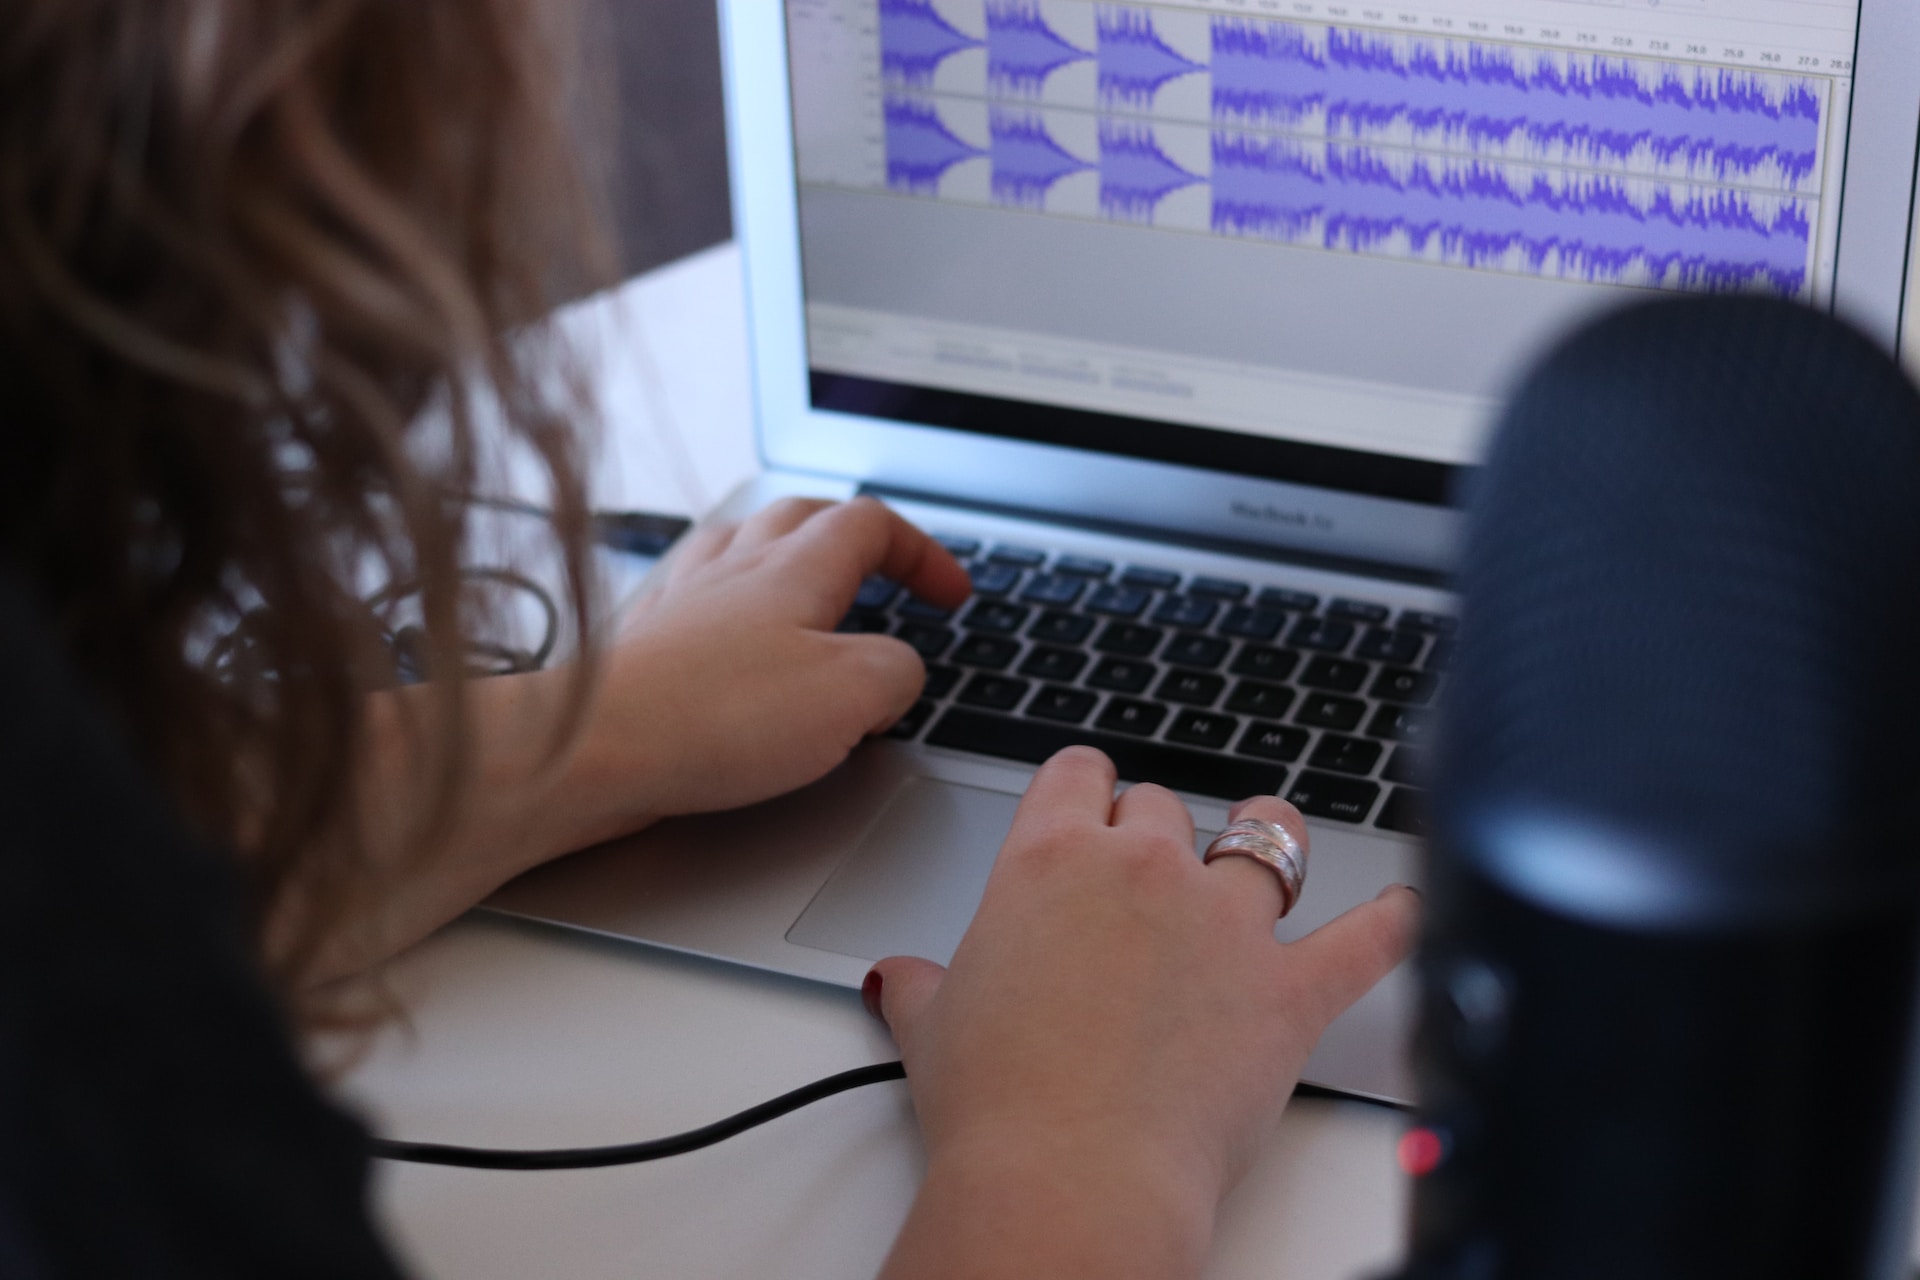 A person with long hair and rings on fingers at a laptop with some podcast editing software on the screen and a podcast microphone in shot